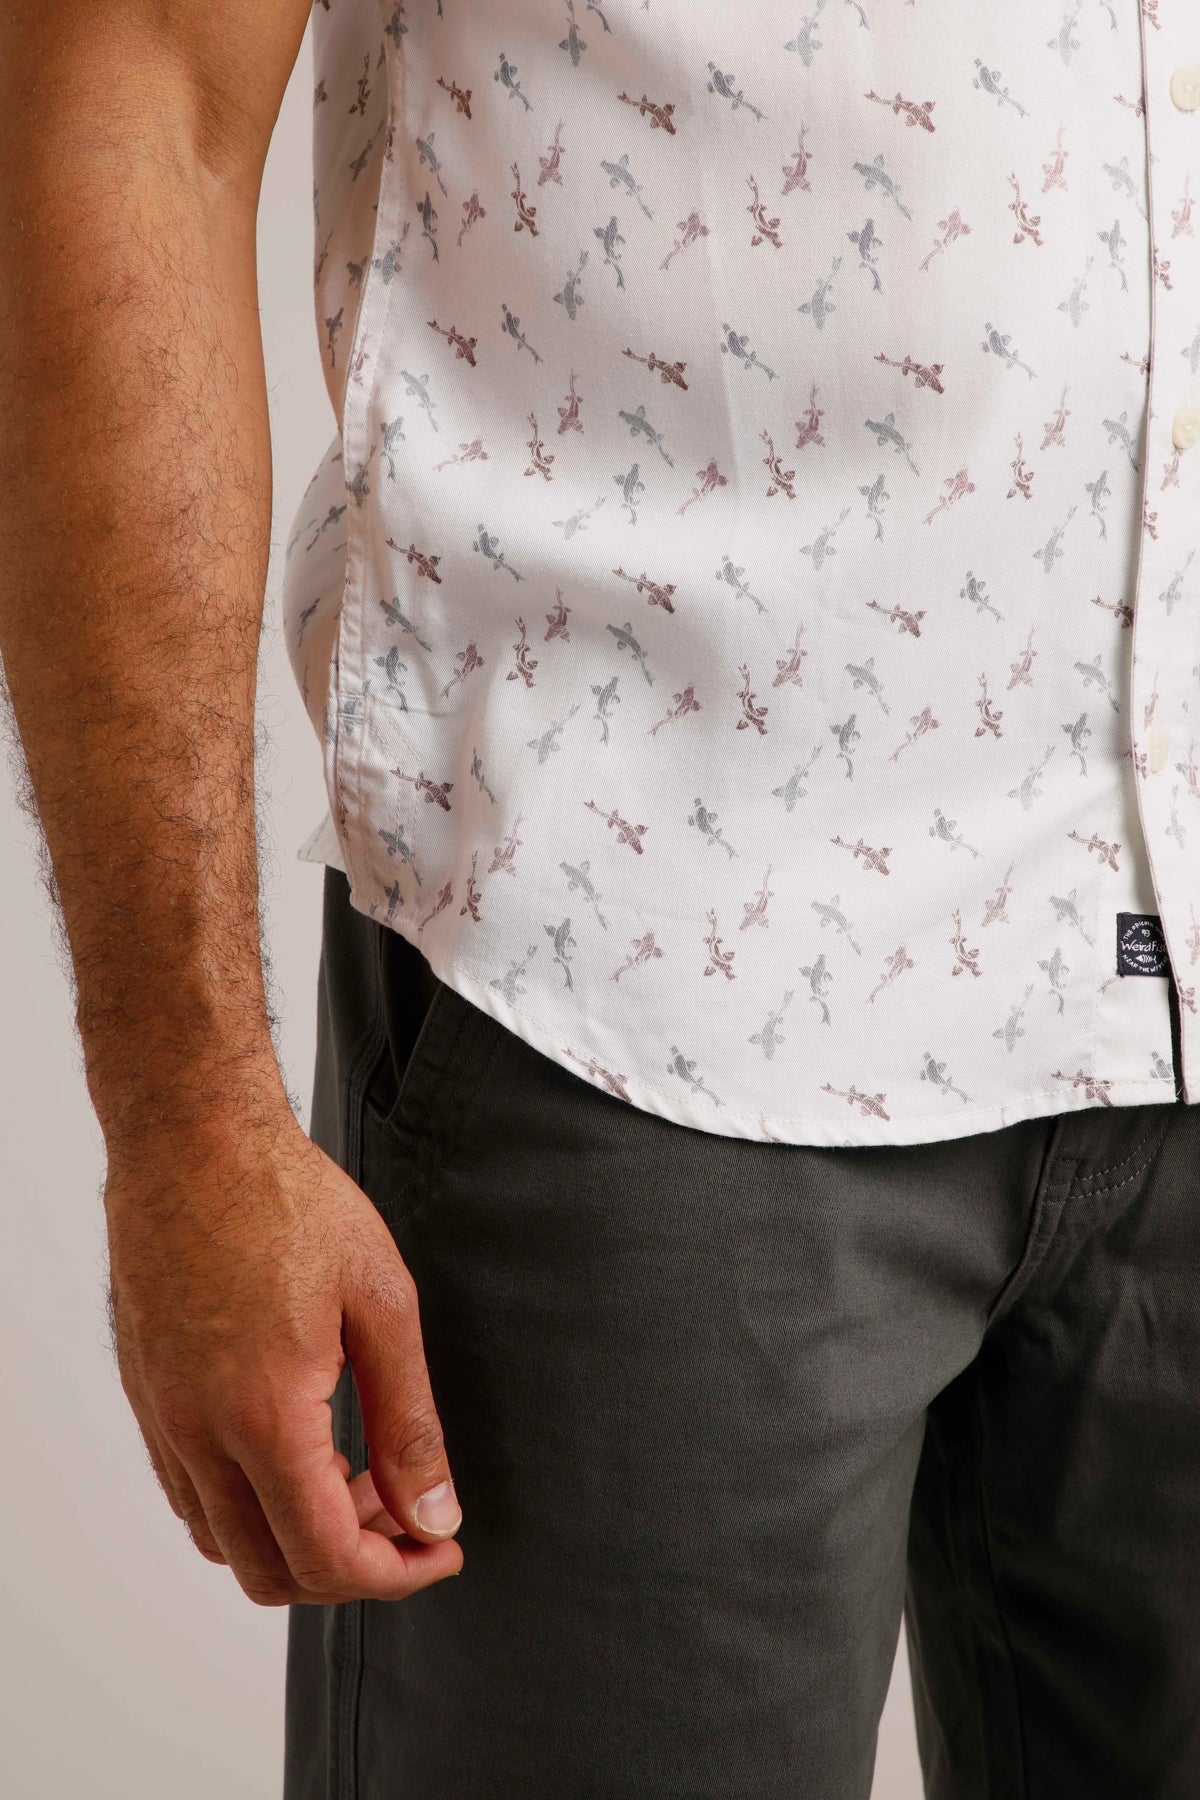 White Keilor men's shirt from Weird Fish in white with a fish print pattern.